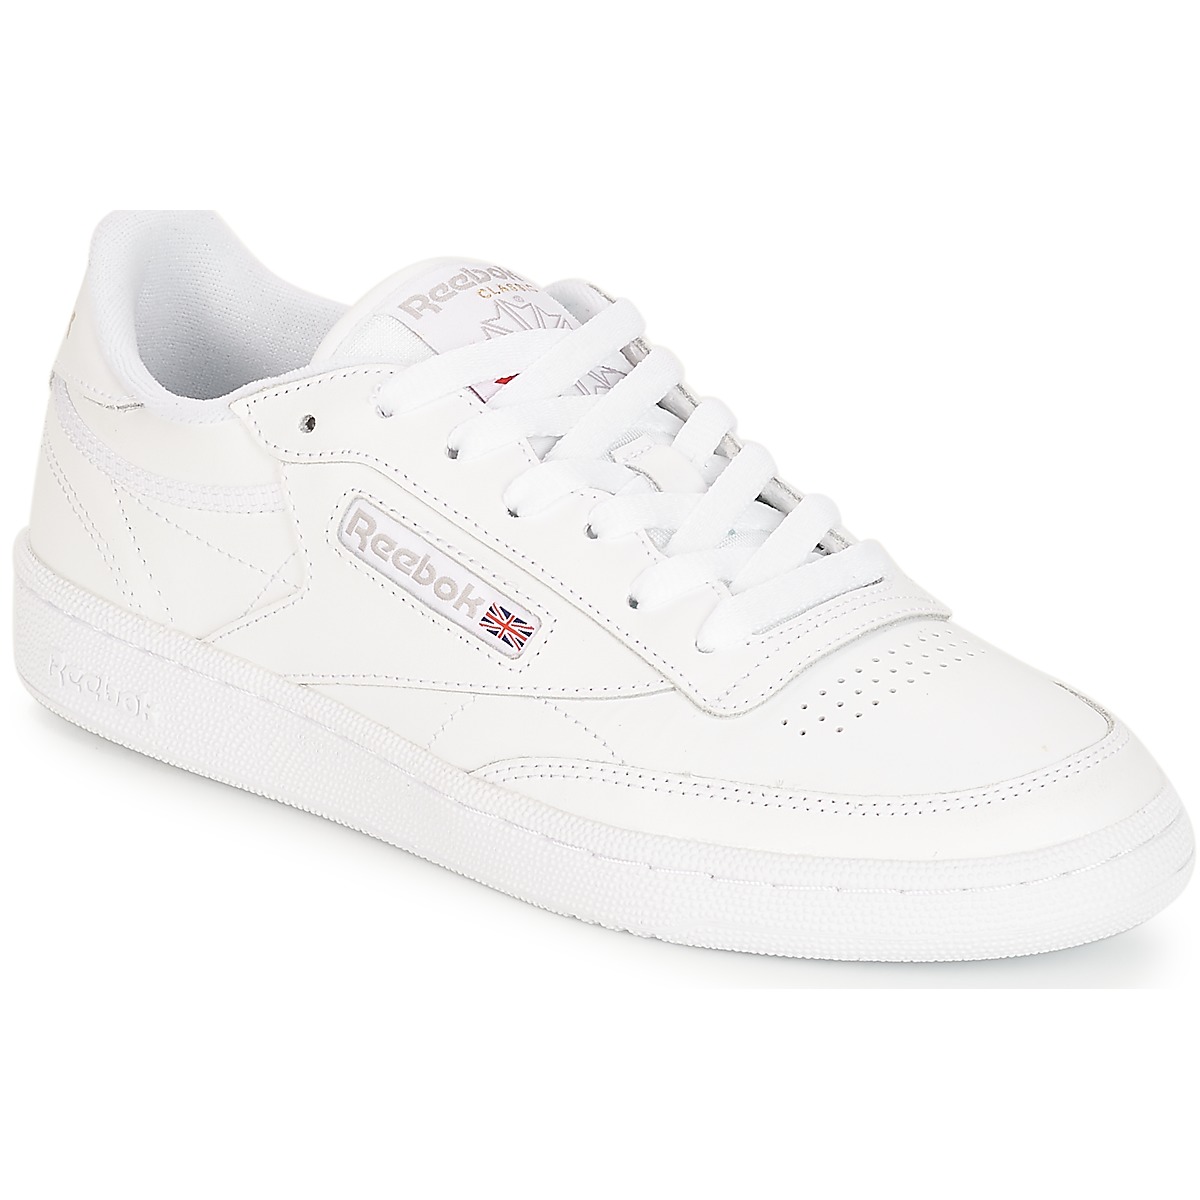 Shoes Women Low top trainers Reebok Classic CLUB C 85 White